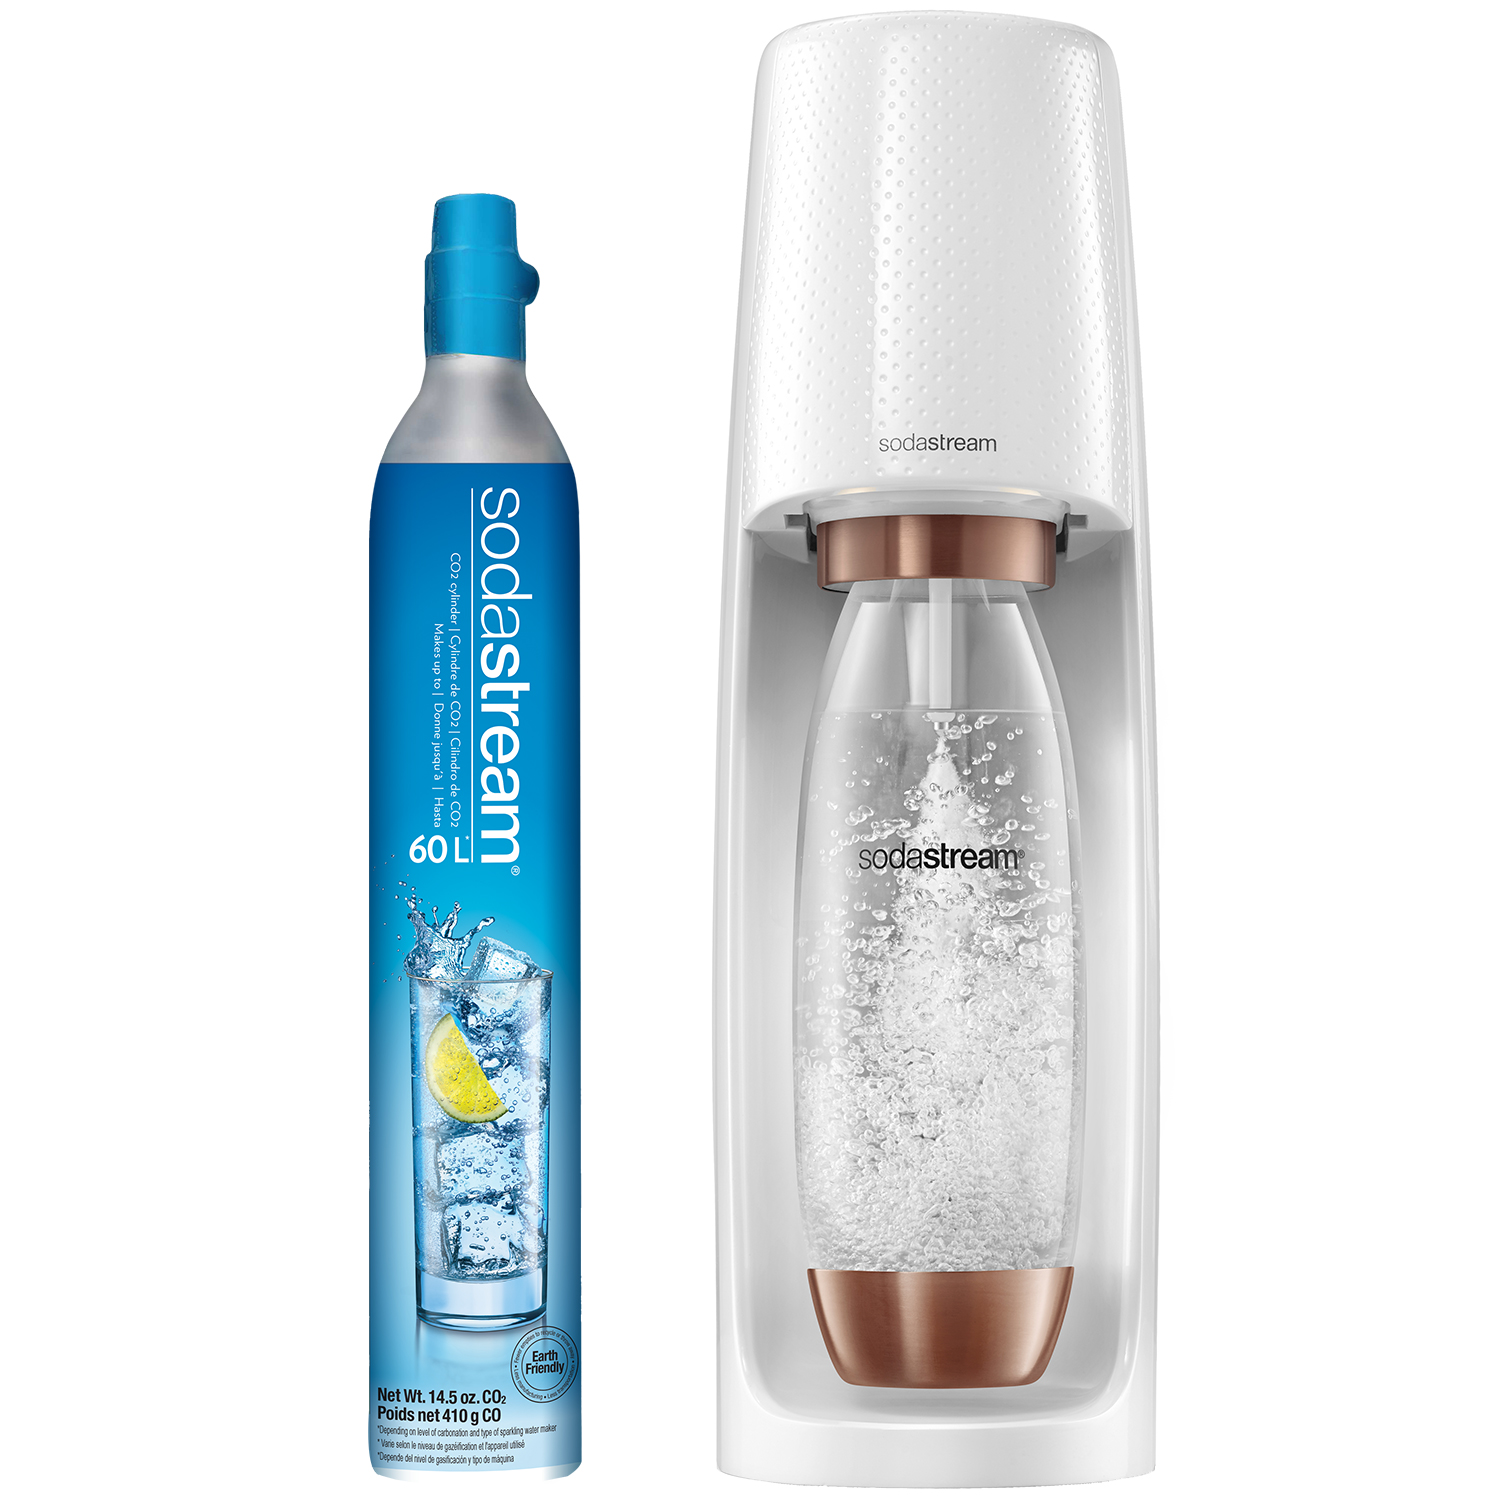 SodaStream Fizzi Sparkling Water Maker (White and Rose Gold) with CO2 and BPA free Bottle - image 1 of 6